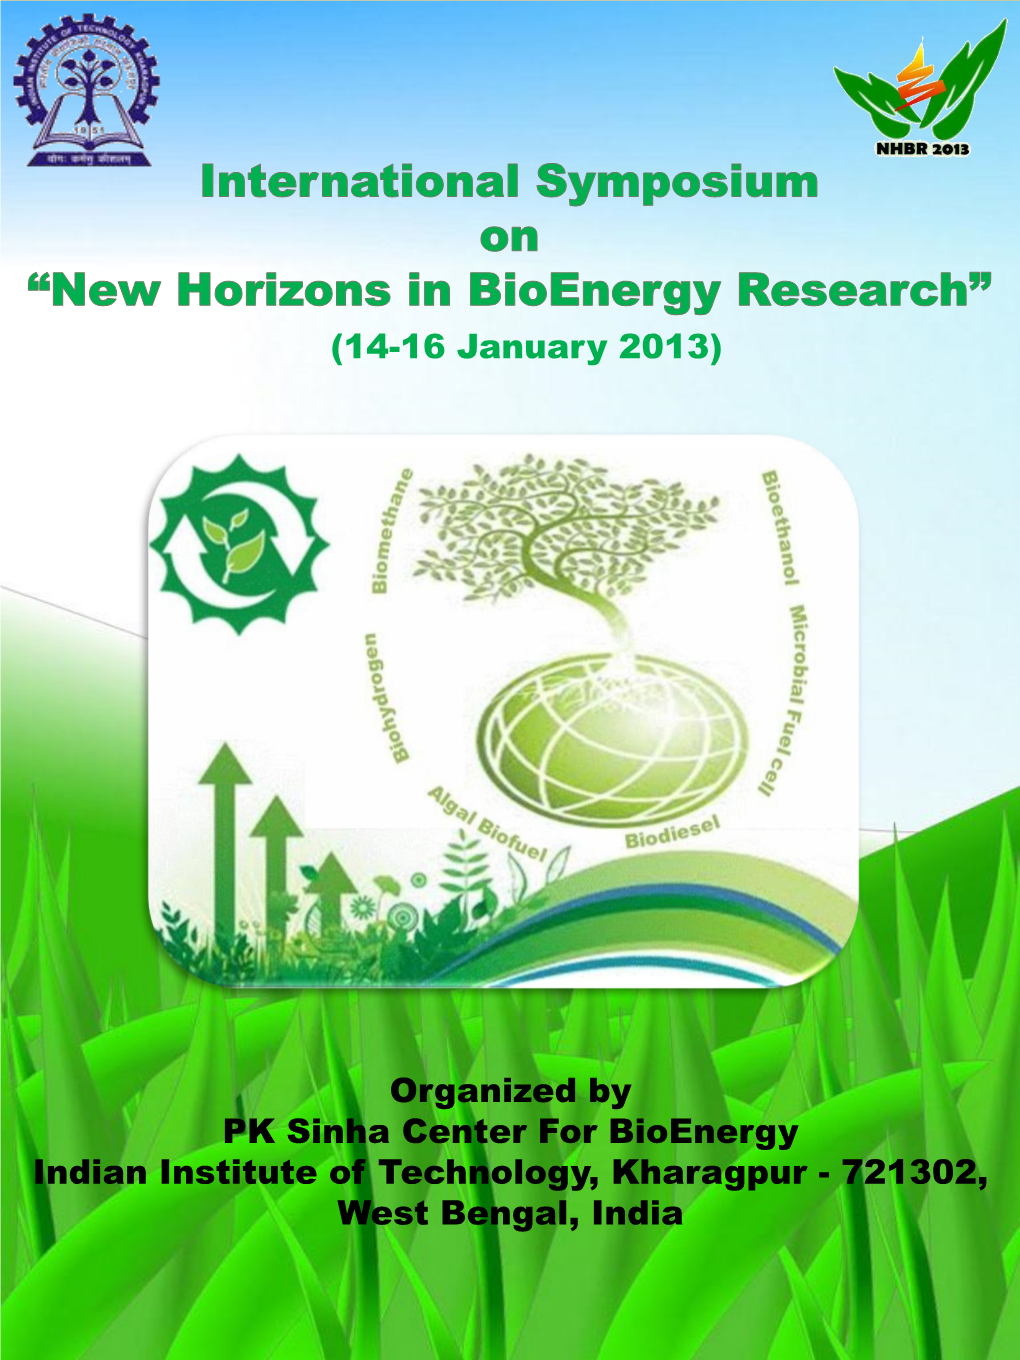 International Symposium on ‘New Horizons in Bioenergy Research, 2013’ to Be Held on January 14-16Th at IIT Kharagpur